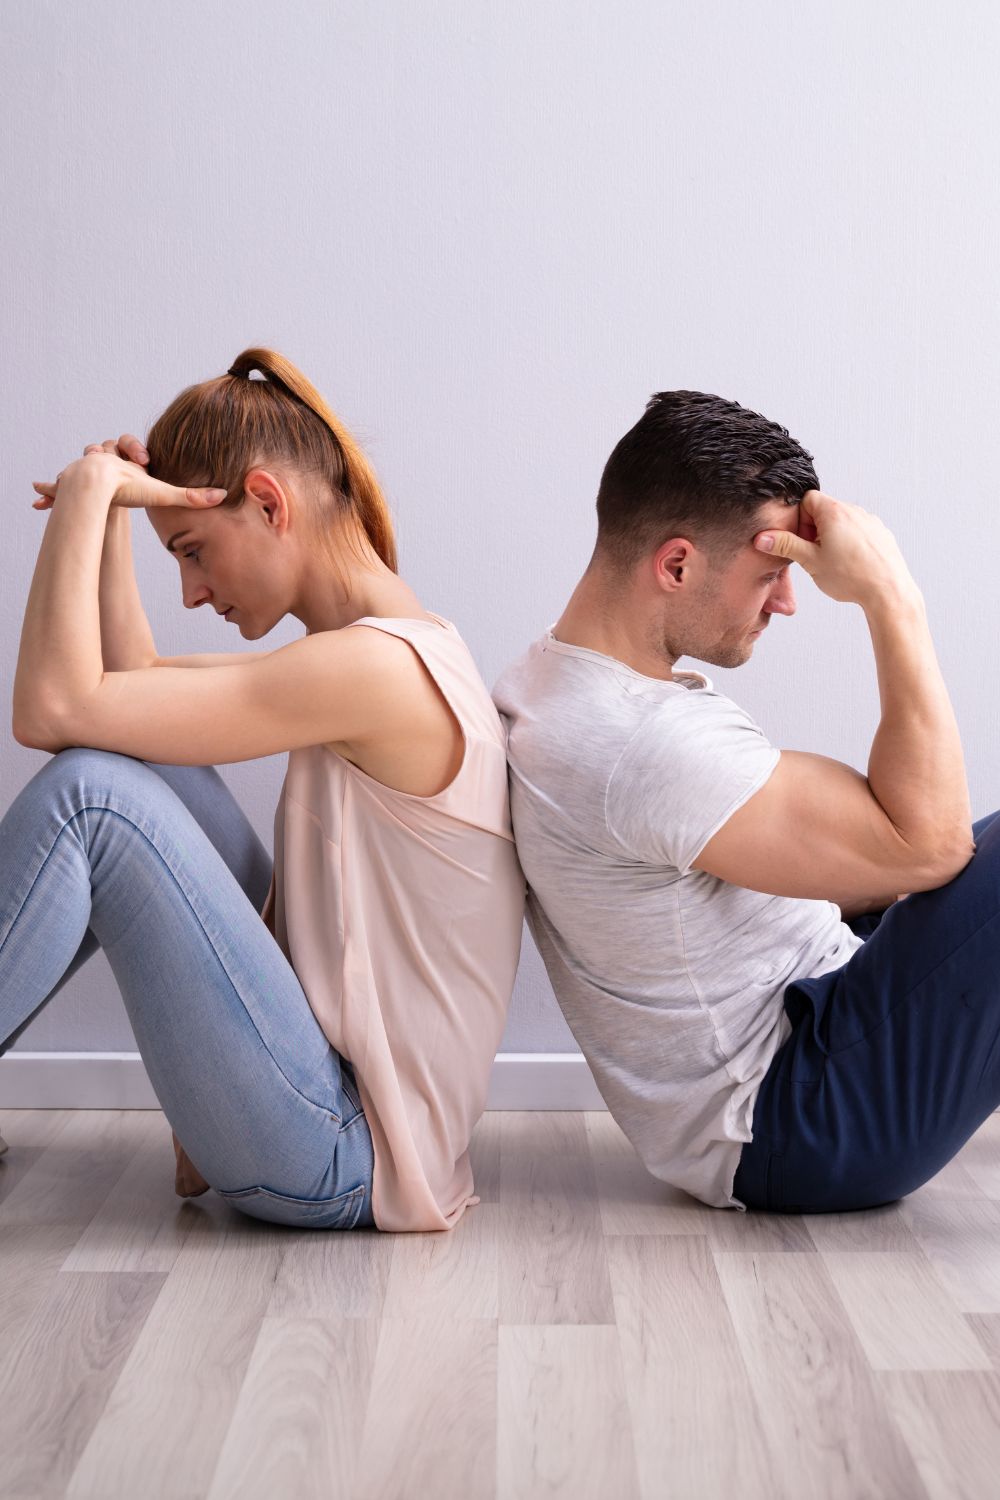 Why men have emotional affairs